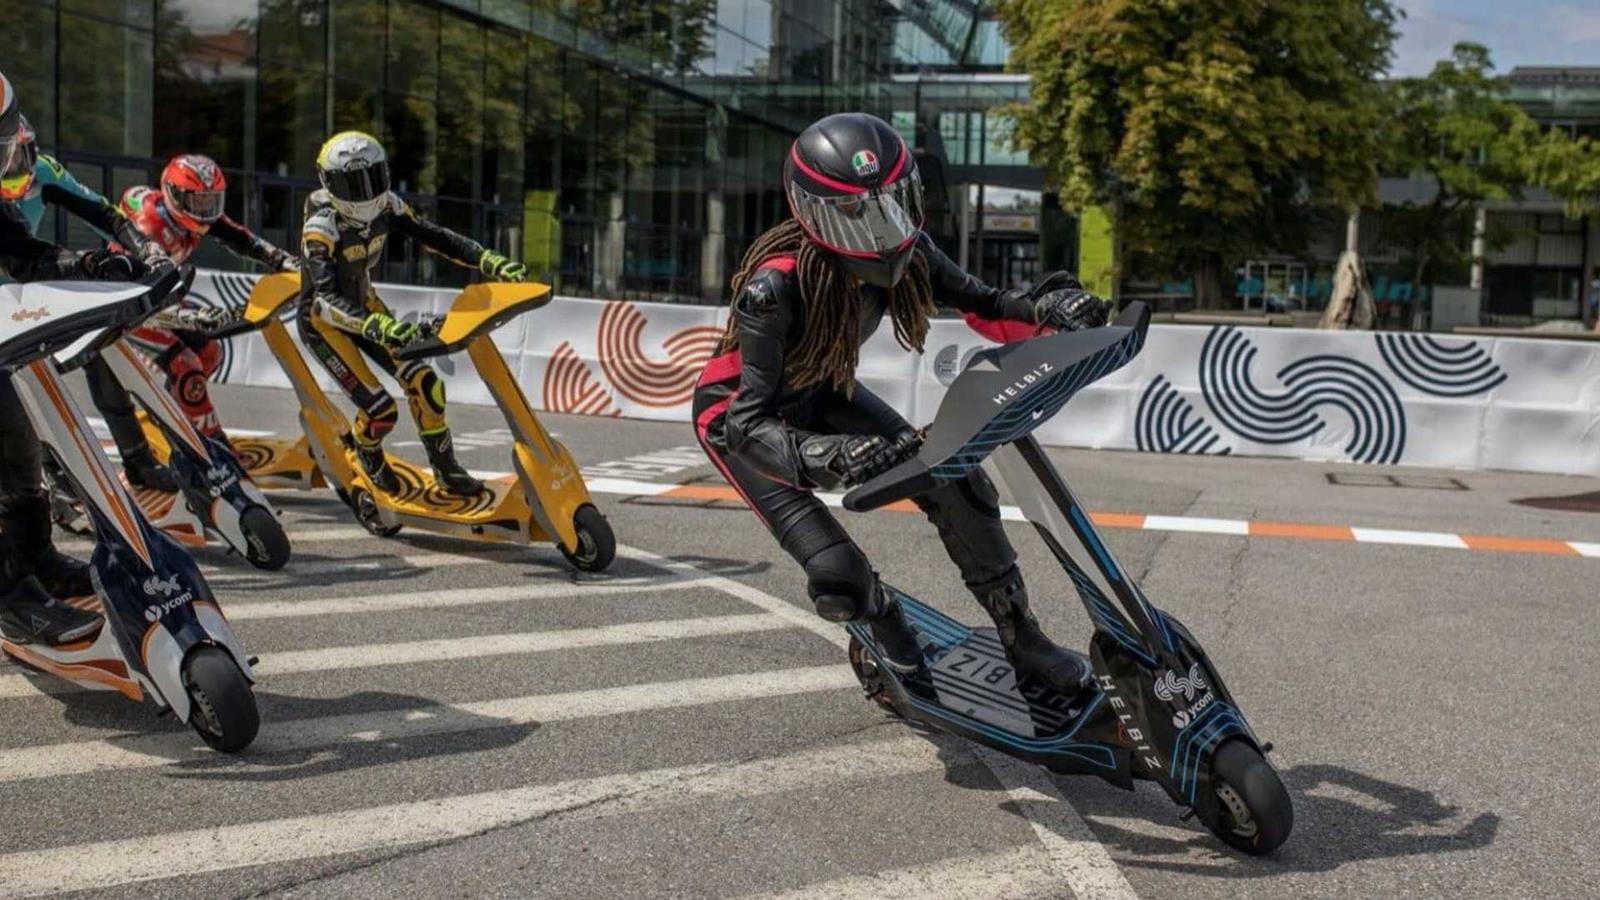 eSkootr, the first international championship of electric scooters